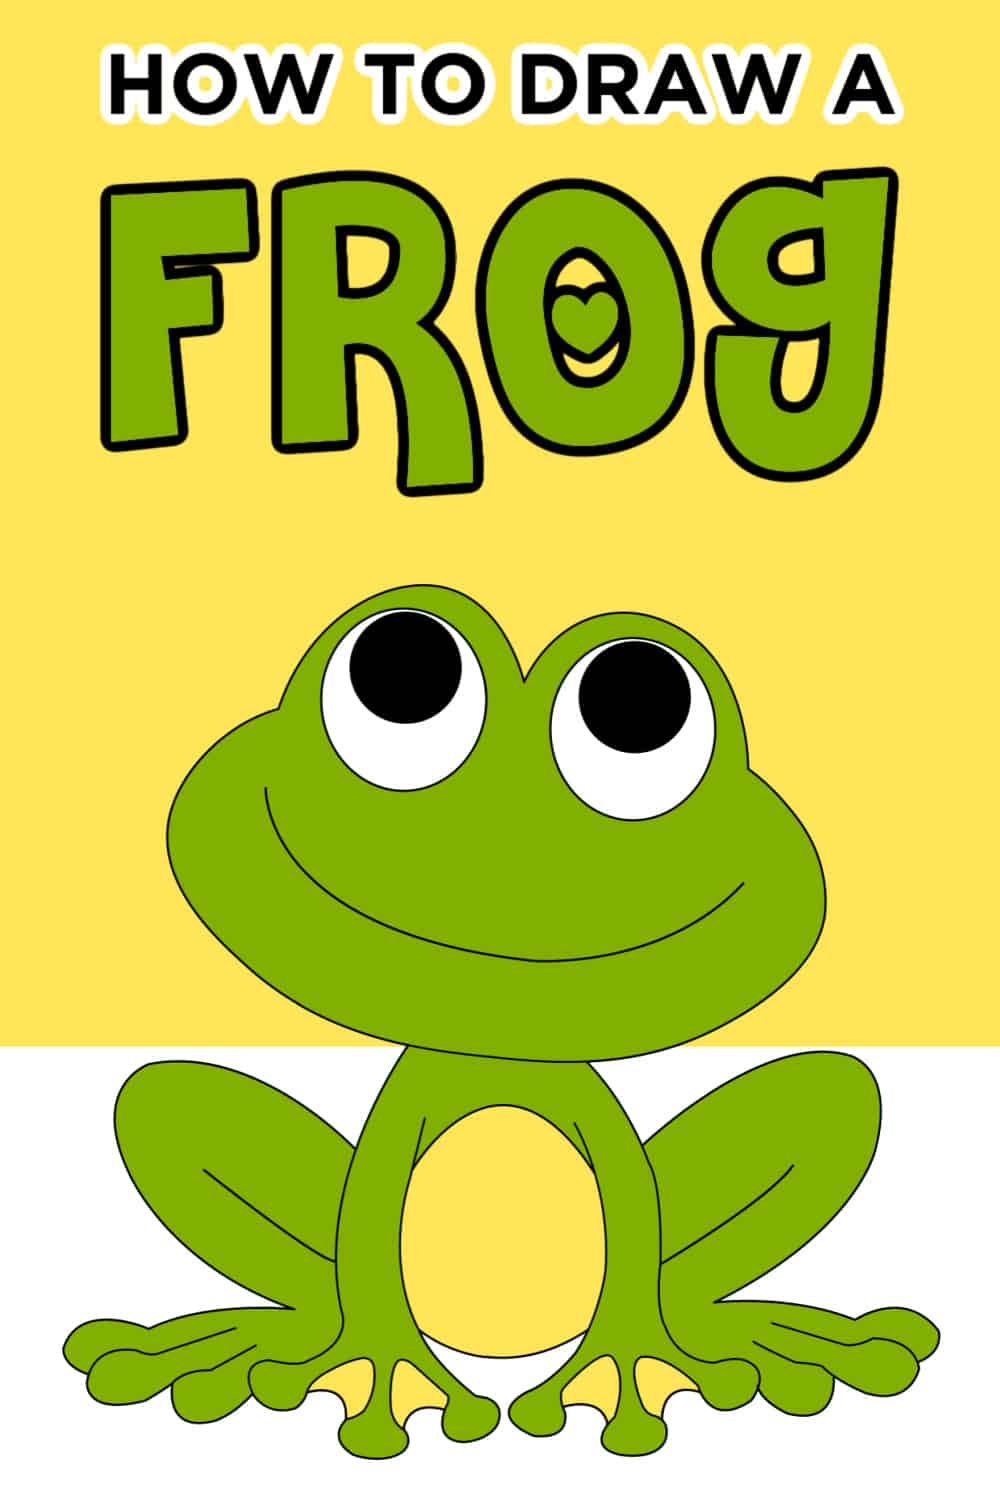 Poisonous frog Royalty Free Stock Free Vector